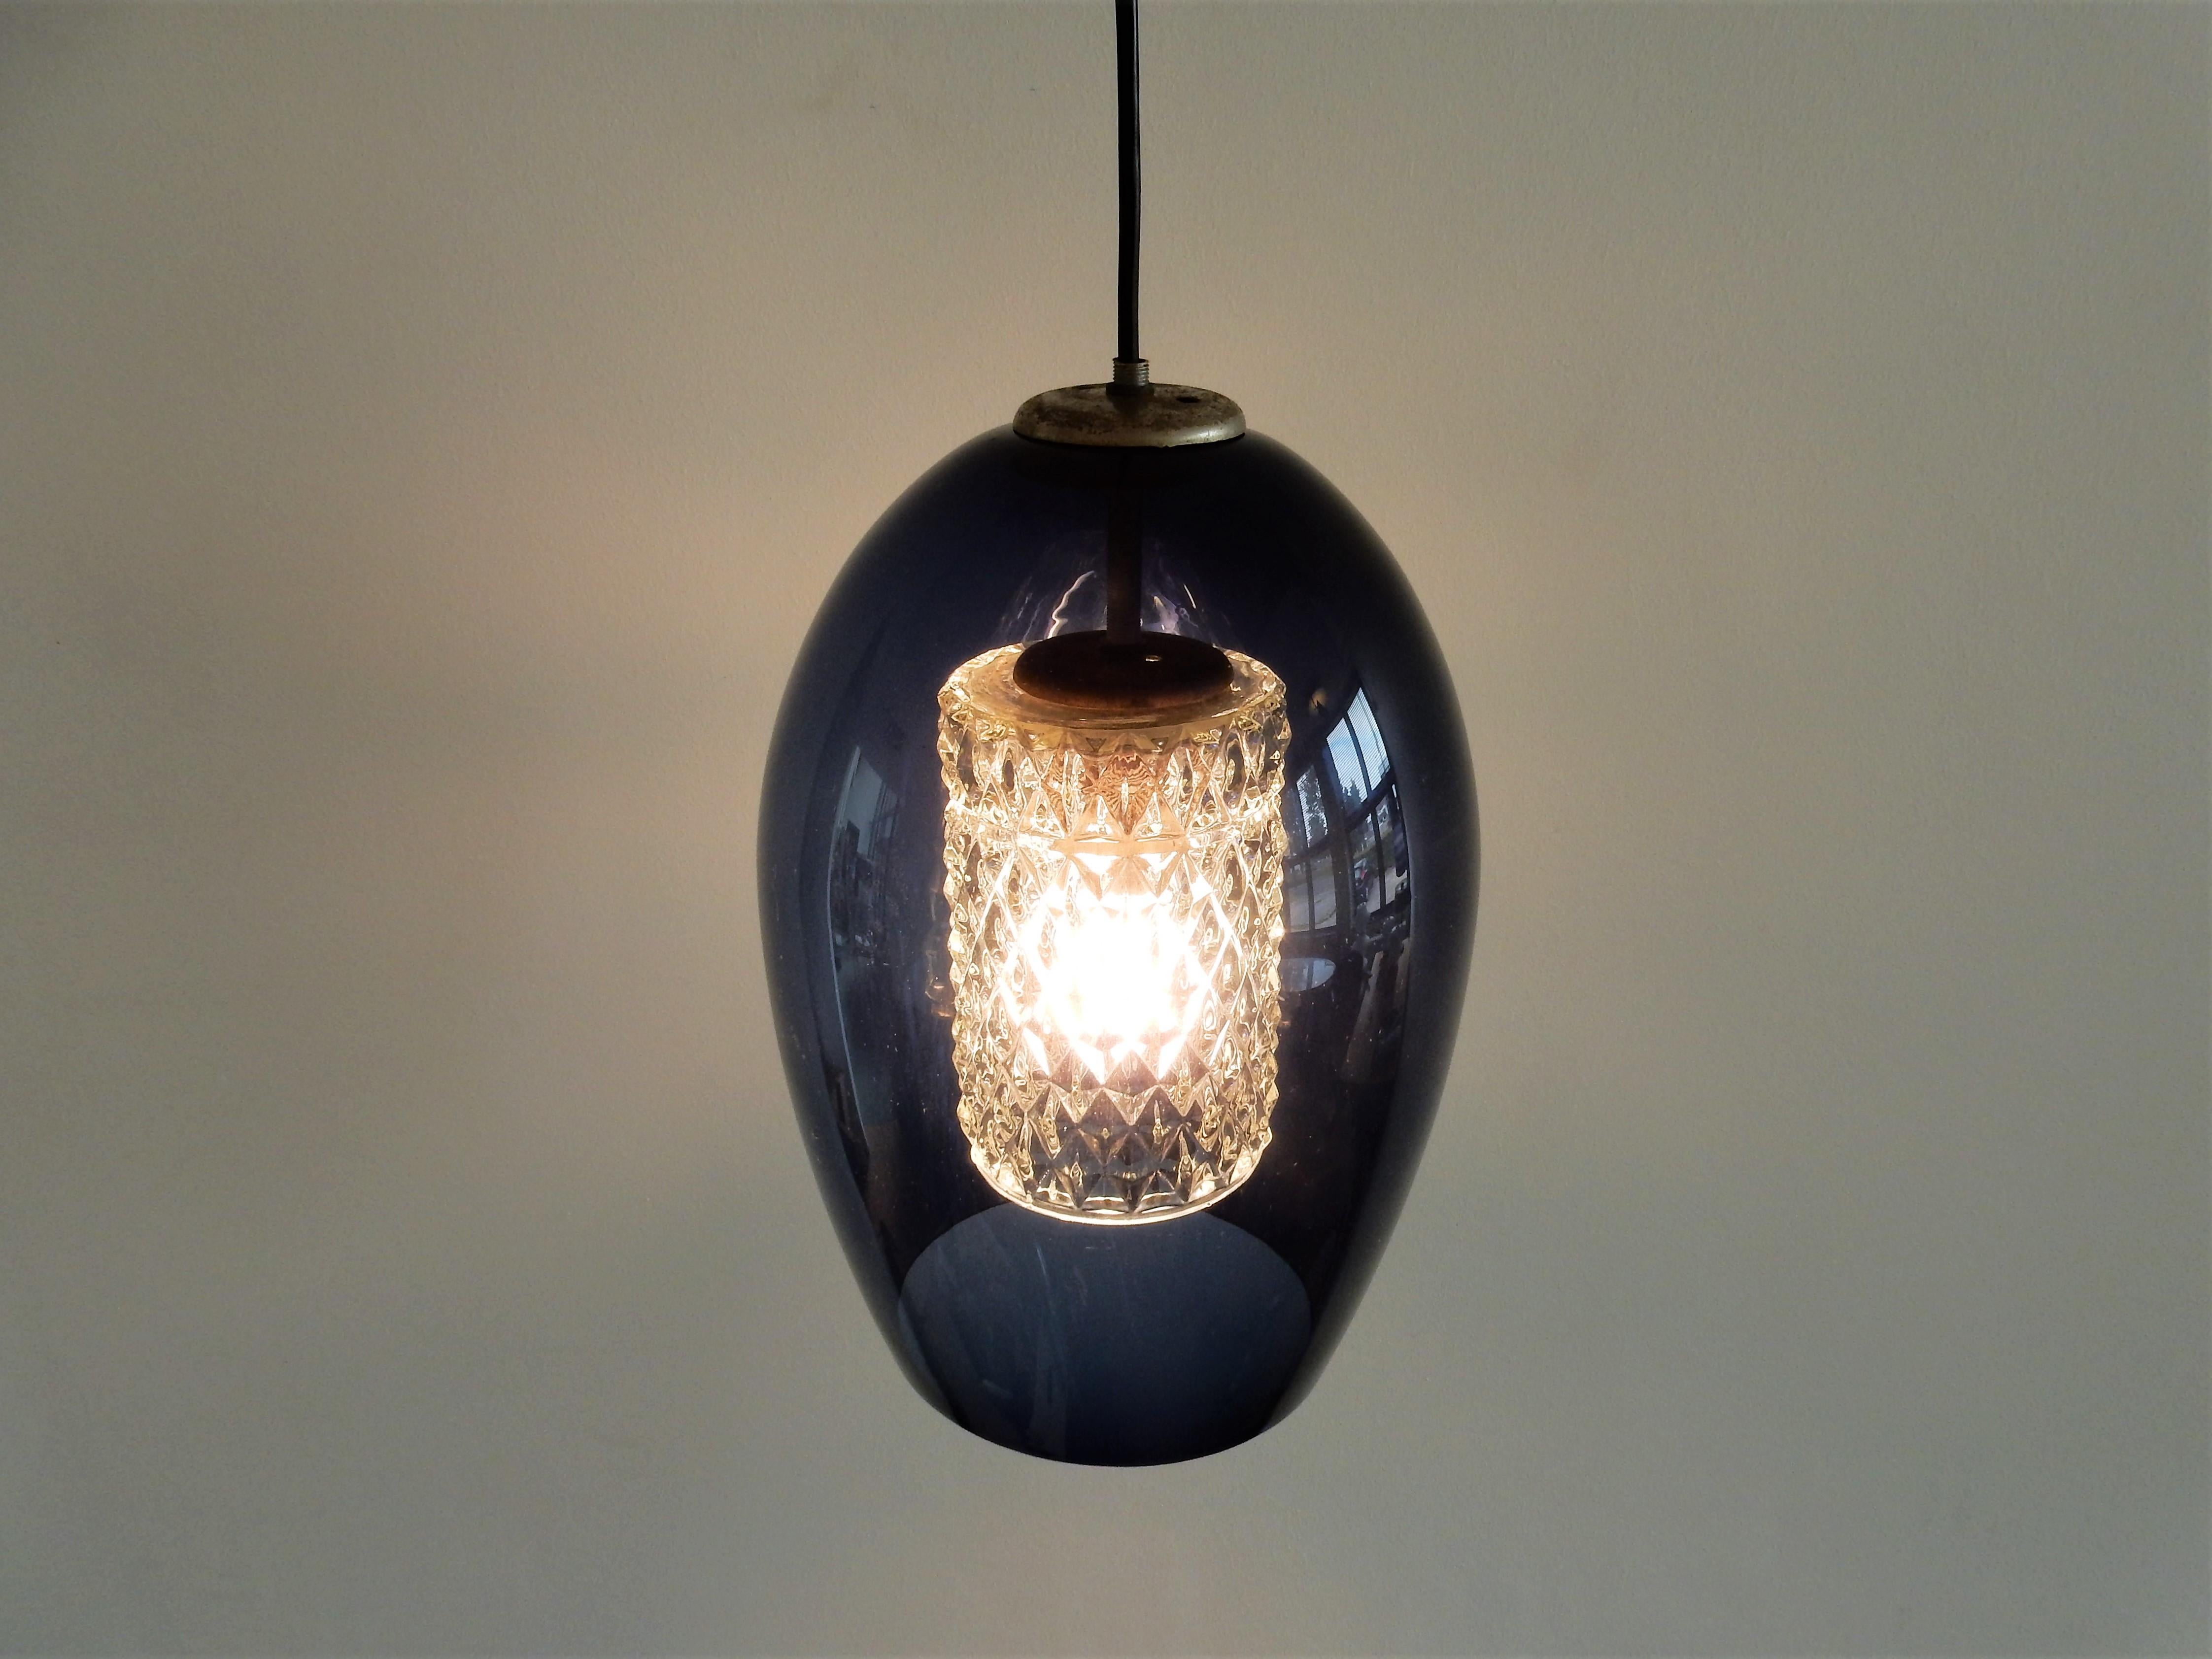 European Blue and Clear Glass Pendant Lamp by Carl Fagerlund (attr.) for Orrefors (attr.)